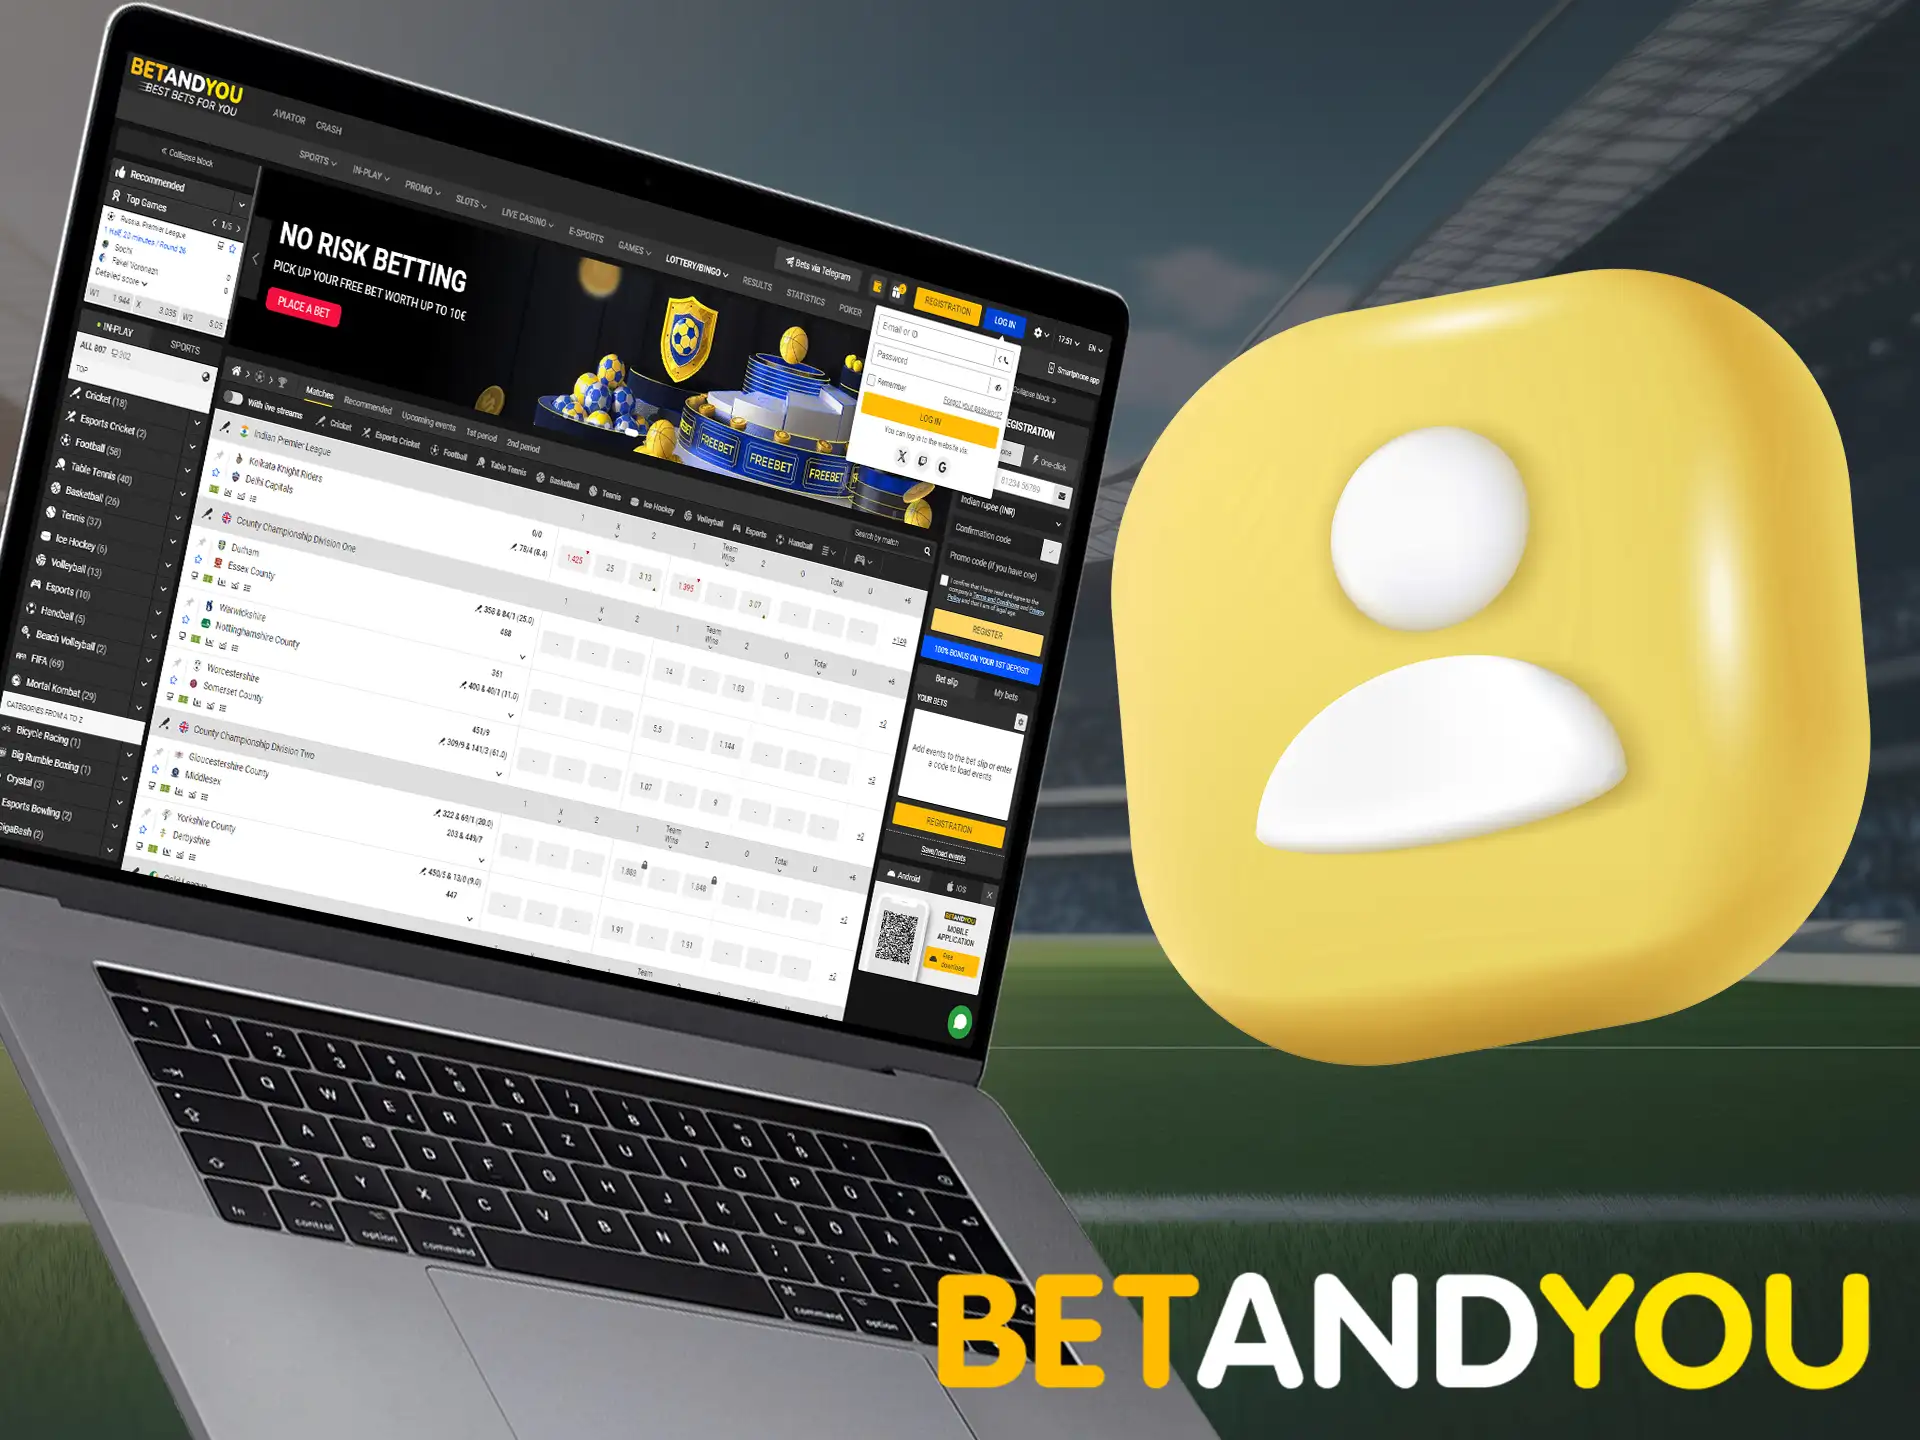 If you have previously used the Betandyou casino and have an account on it, log in to the platform using our instructions.